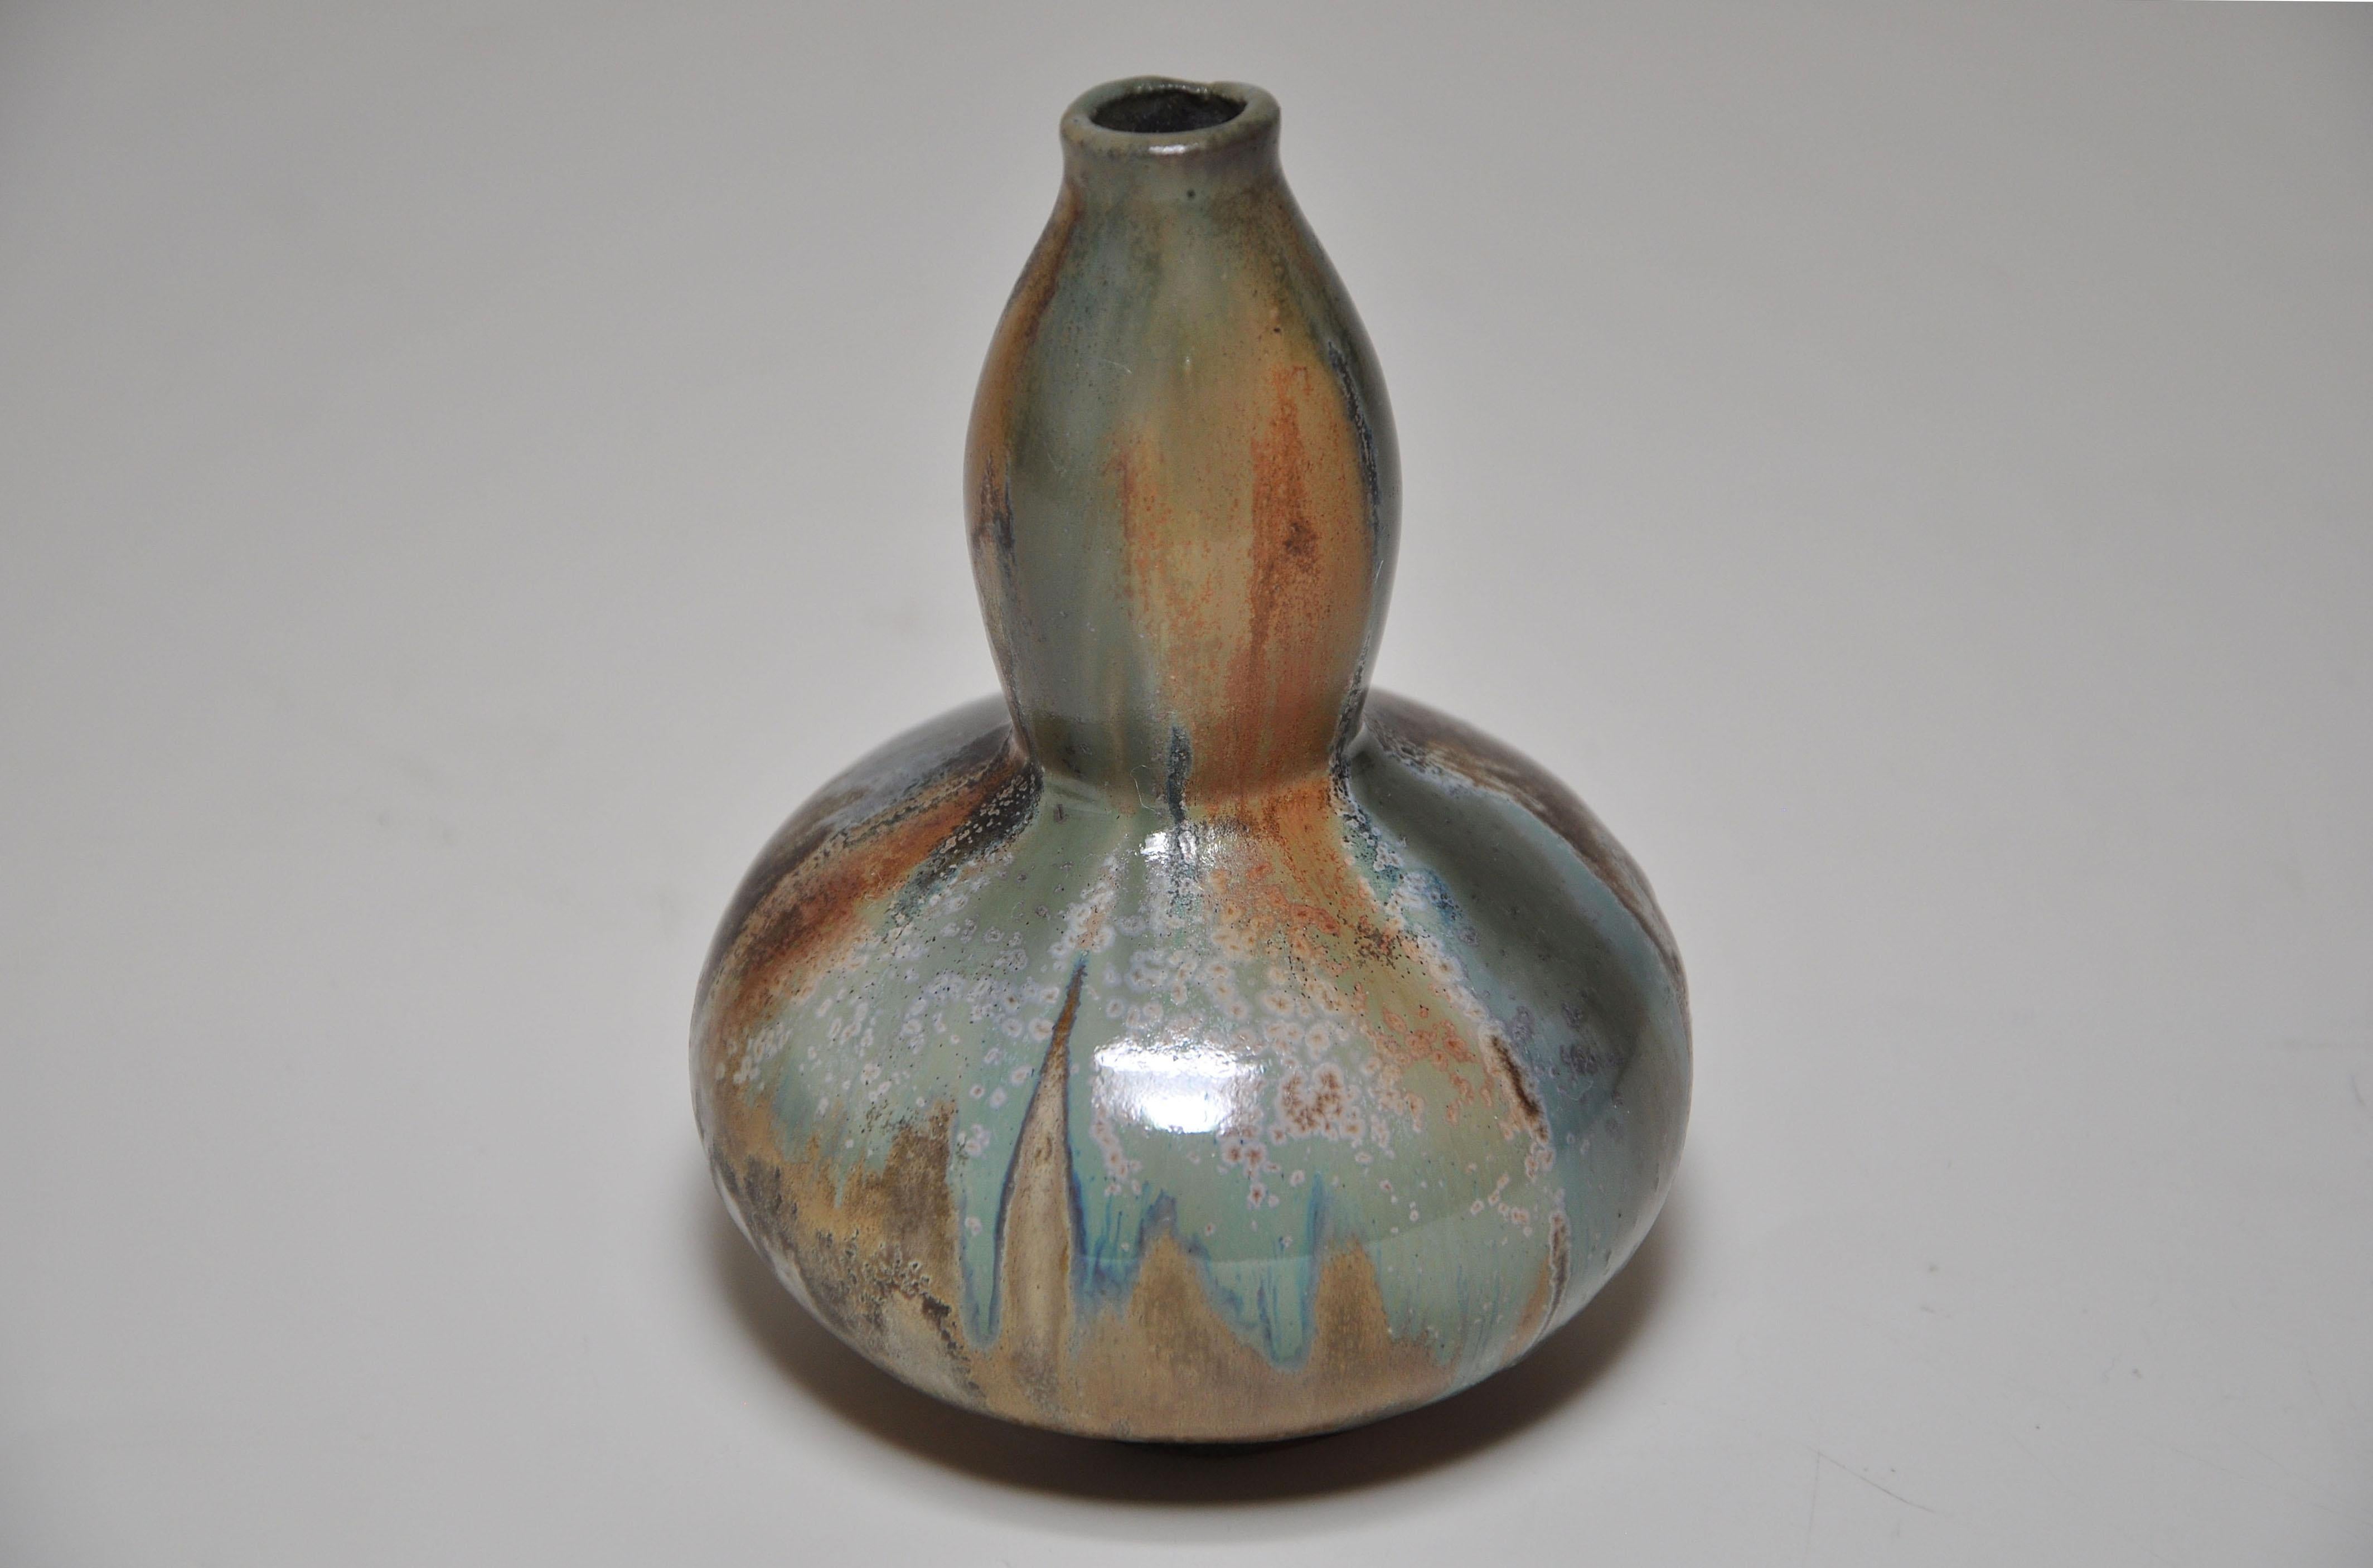 A rare small stoneware vase of double-gourd Japonist form, freely treated at the top rim. It has a thick brown, green ochre flowing flambe glaze. By the French art ceramist Jean Langlade (1879-1928) of Paris and Saint-Amand-les-Eaux. Marked with